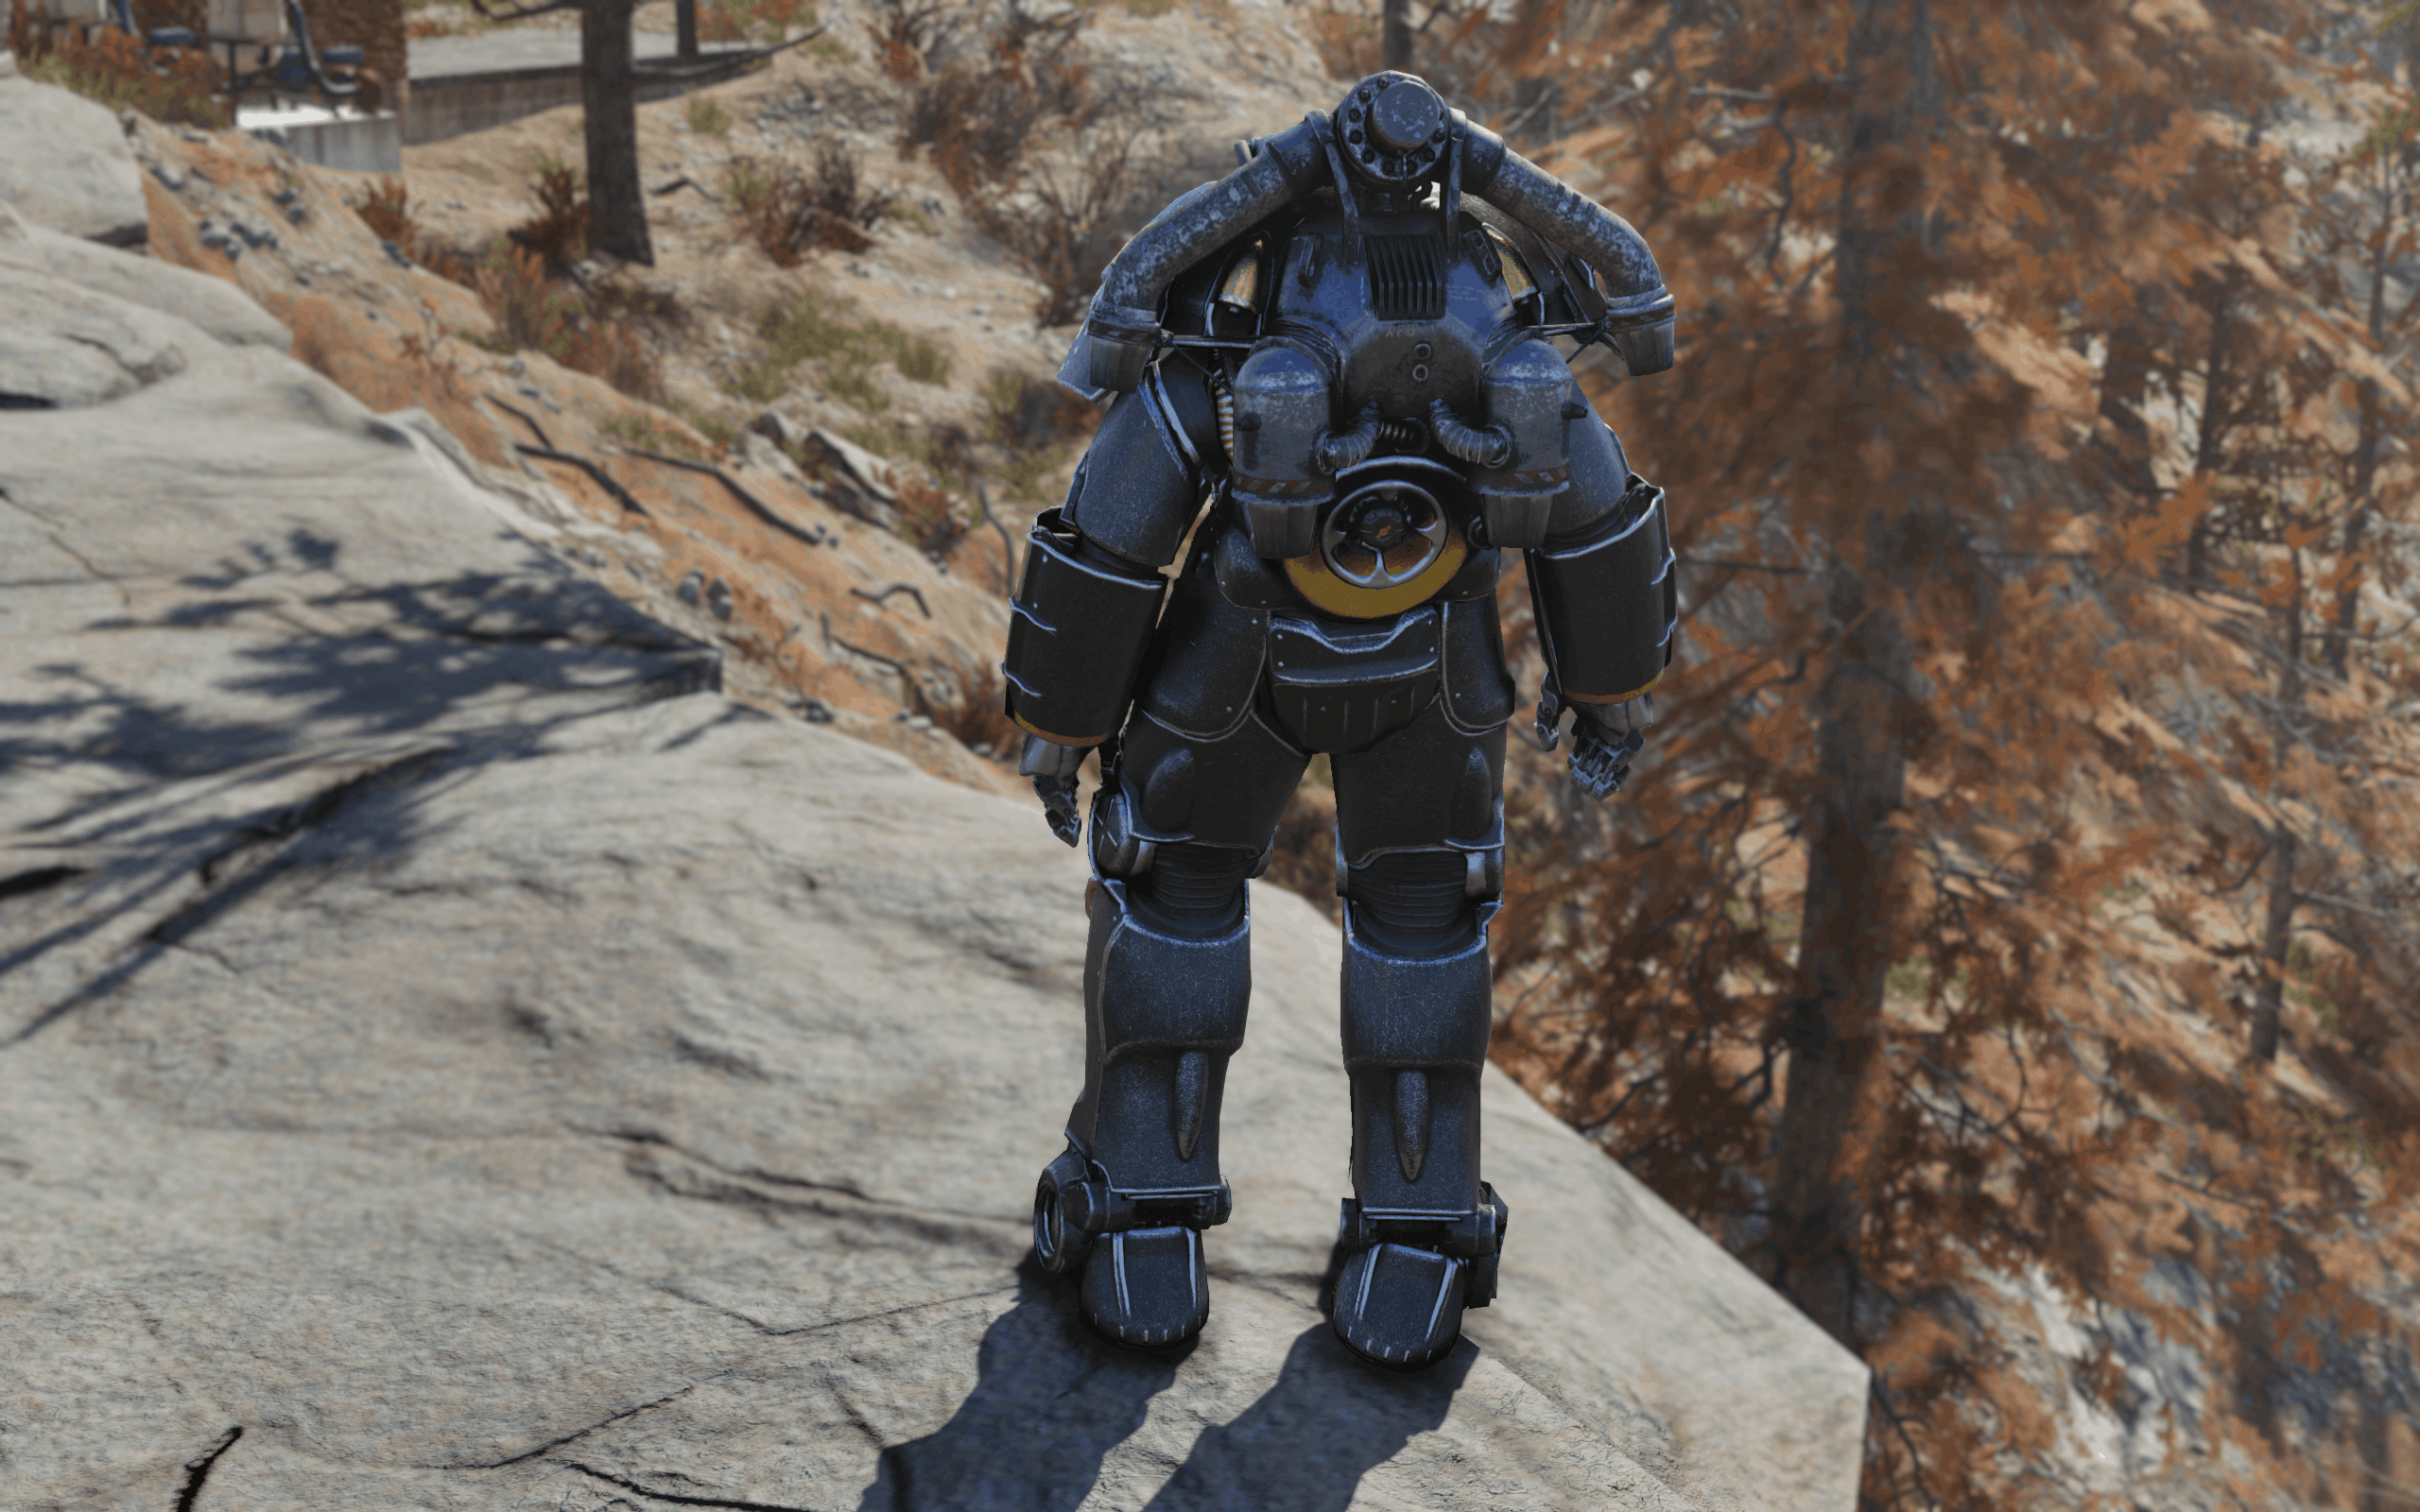 Dark Power Armor Frame And Jetpack 4k Fallout 76 Mod Download